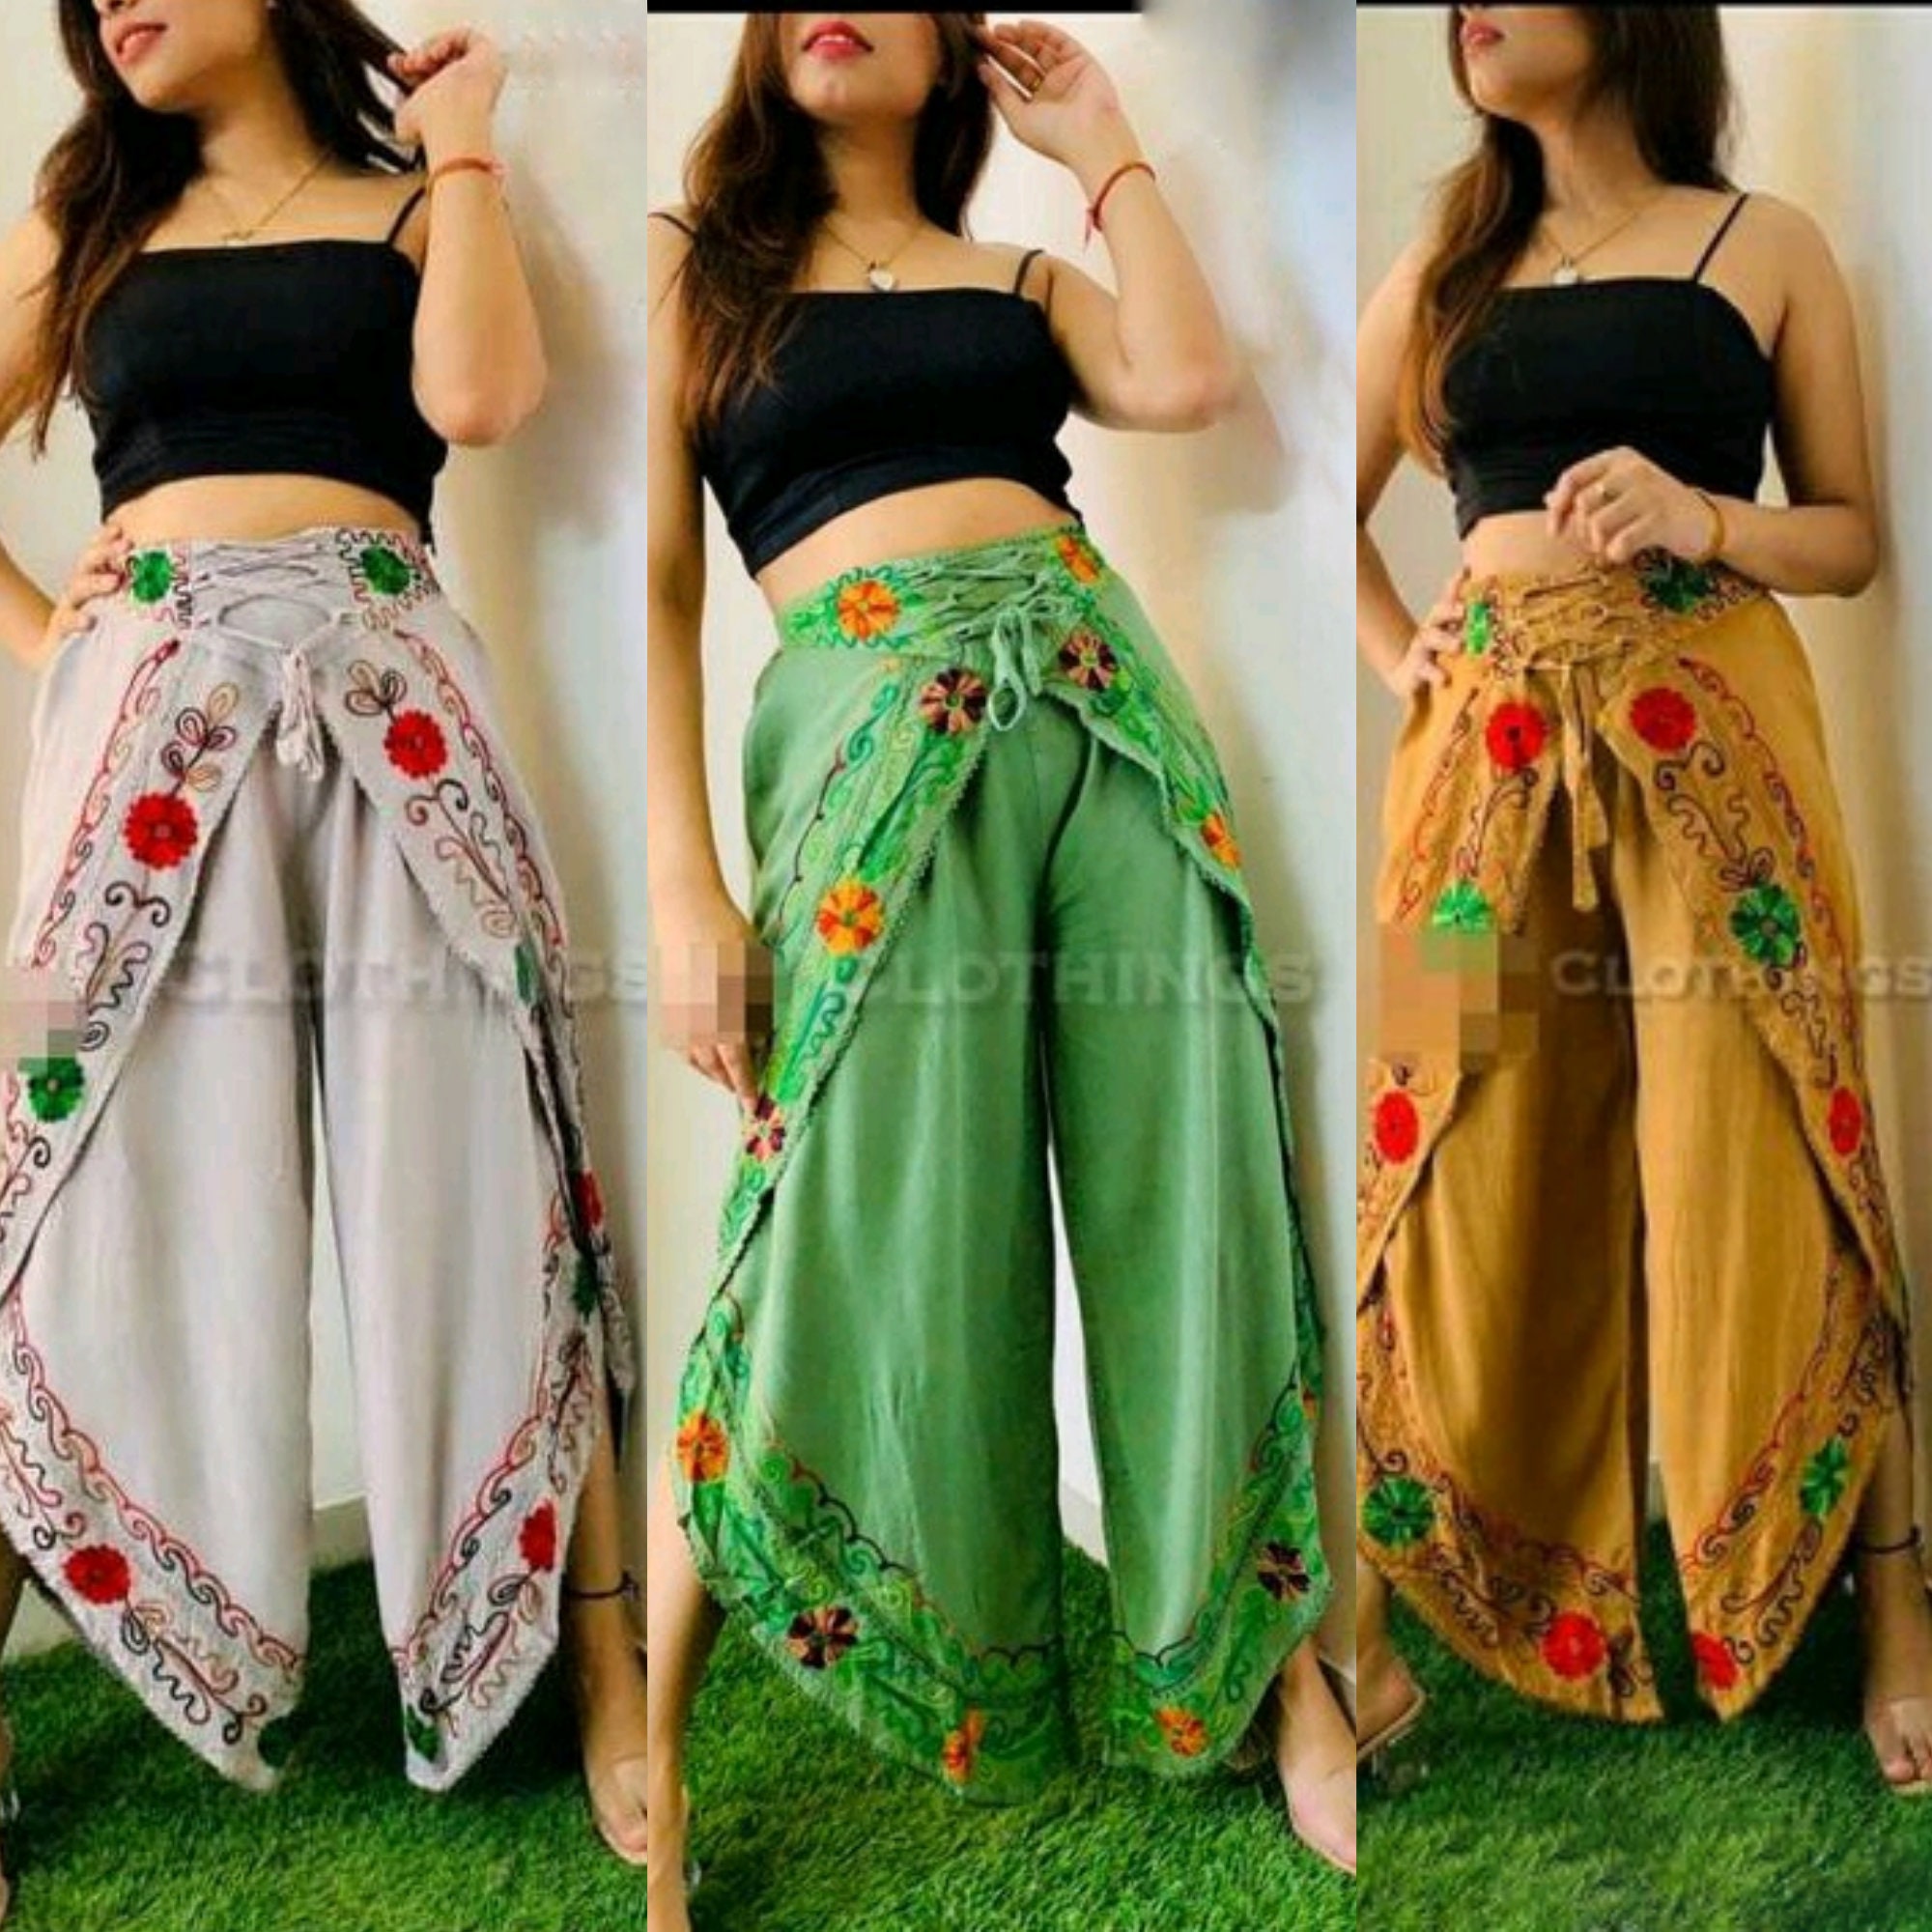 Buy 3NH Ladies Comfy Yoga Beach Baggy Gypsy Women Harem Pants Trousers  Indian Summer Loose Yoga Pants One Size  Design 1 at Amazonin